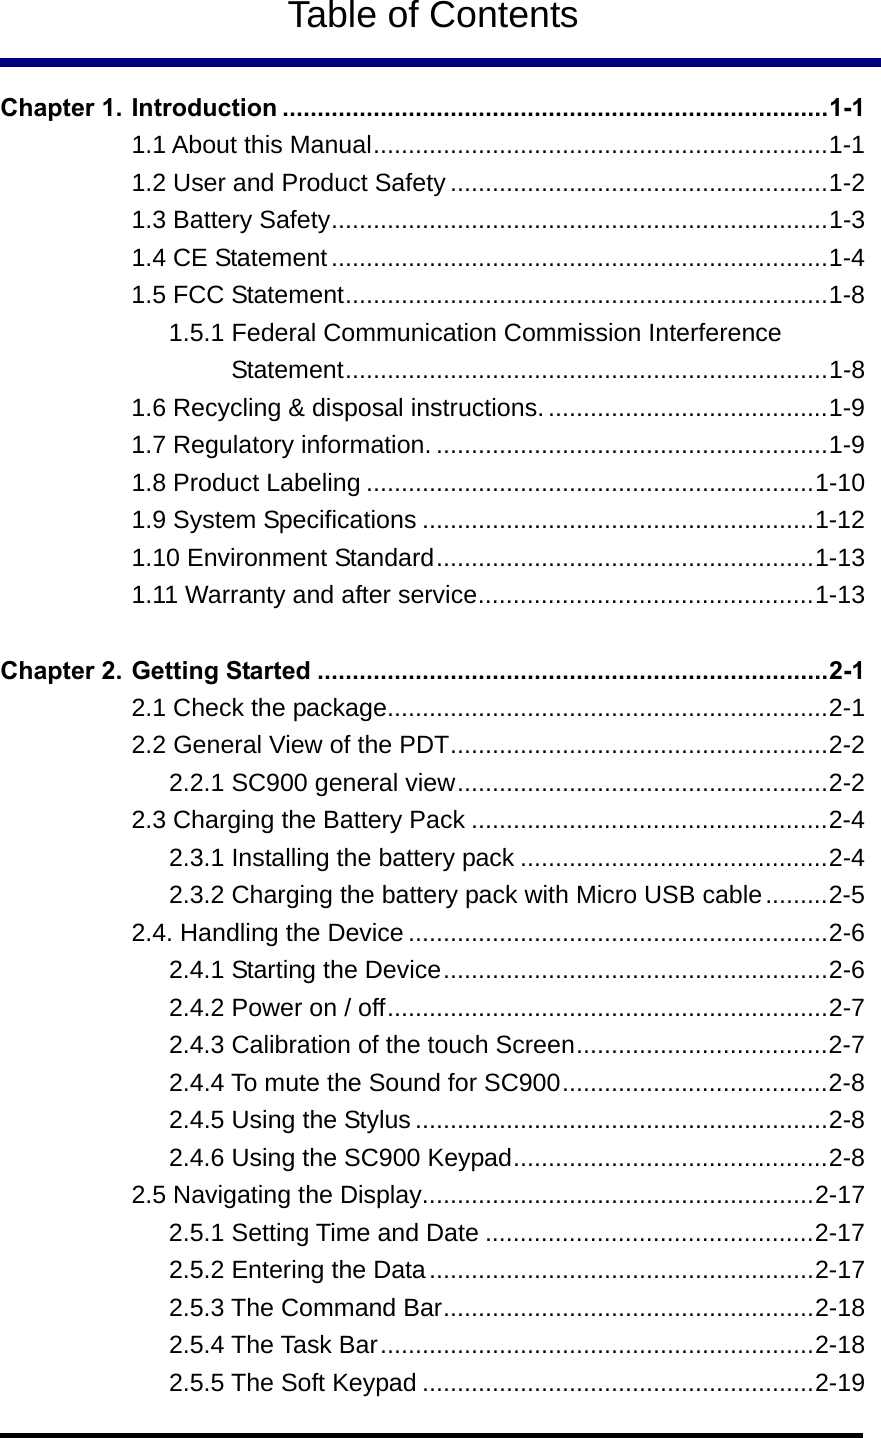   Table of Contents  Chapter 1. Introduction ..............................................................................1-1 1.1 About this Manual.................................................................1-1 1.2 User and Product Safety ......................................................1-2 1.3 Battery Safety.......................................................................1-3 1.4 CE Statement .......................................................................1-4 1.5 FCC Statement.....................................................................1-8 1.5.1 Federal Communication Commission Interference Statement.....................................................................1-8 1.6 Recycling &amp; disposal instructions. ........................................1-9 1.7 Regulatory information. ........................................................1-9 1.8 Product Labeling ................................................................1-10 1.9 System Specifications ........................................................1-12 1.10 Environment Standard......................................................1-13 1.11 Warranty and after service................................................1-13  Chapter 2. Getting Started .........................................................................2-1 2.1 Check the package...............................................................2-1 2.2 General View of the PDT......................................................2-2 2.2.1 SC900 general view.....................................................2-2 2.3 Charging the Battery Pack ...................................................2-4 2.3.1 Installing the battery pack ............................................2-4 2.3.2 Charging the battery pack with Micro USB cable.........2-5 2.4. Handling the Device ............................................................2-6 2.4.1 Starting the Device.......................................................2-6 2.4.2 Power on / off...............................................................2-7 2.4.3 Calibration of the touch Screen....................................2-7 2.4.4 To mute the Sound for SC900......................................2-8 2.4.5 Using the Stylus...........................................................2-8 2.4.6 Using the SC900 Keypad.............................................2-8 2.5 Navigating the Display........................................................2-17 2.5.1 Setting Time and Date ...............................................2-17 2.5.2 Entering the Data.......................................................2-17 2.5.3 The Command Bar.....................................................2-18 2.5.4 The Task Bar..............................................................2-18 2.5.5 The Soft Keypad ........................................................2-19 